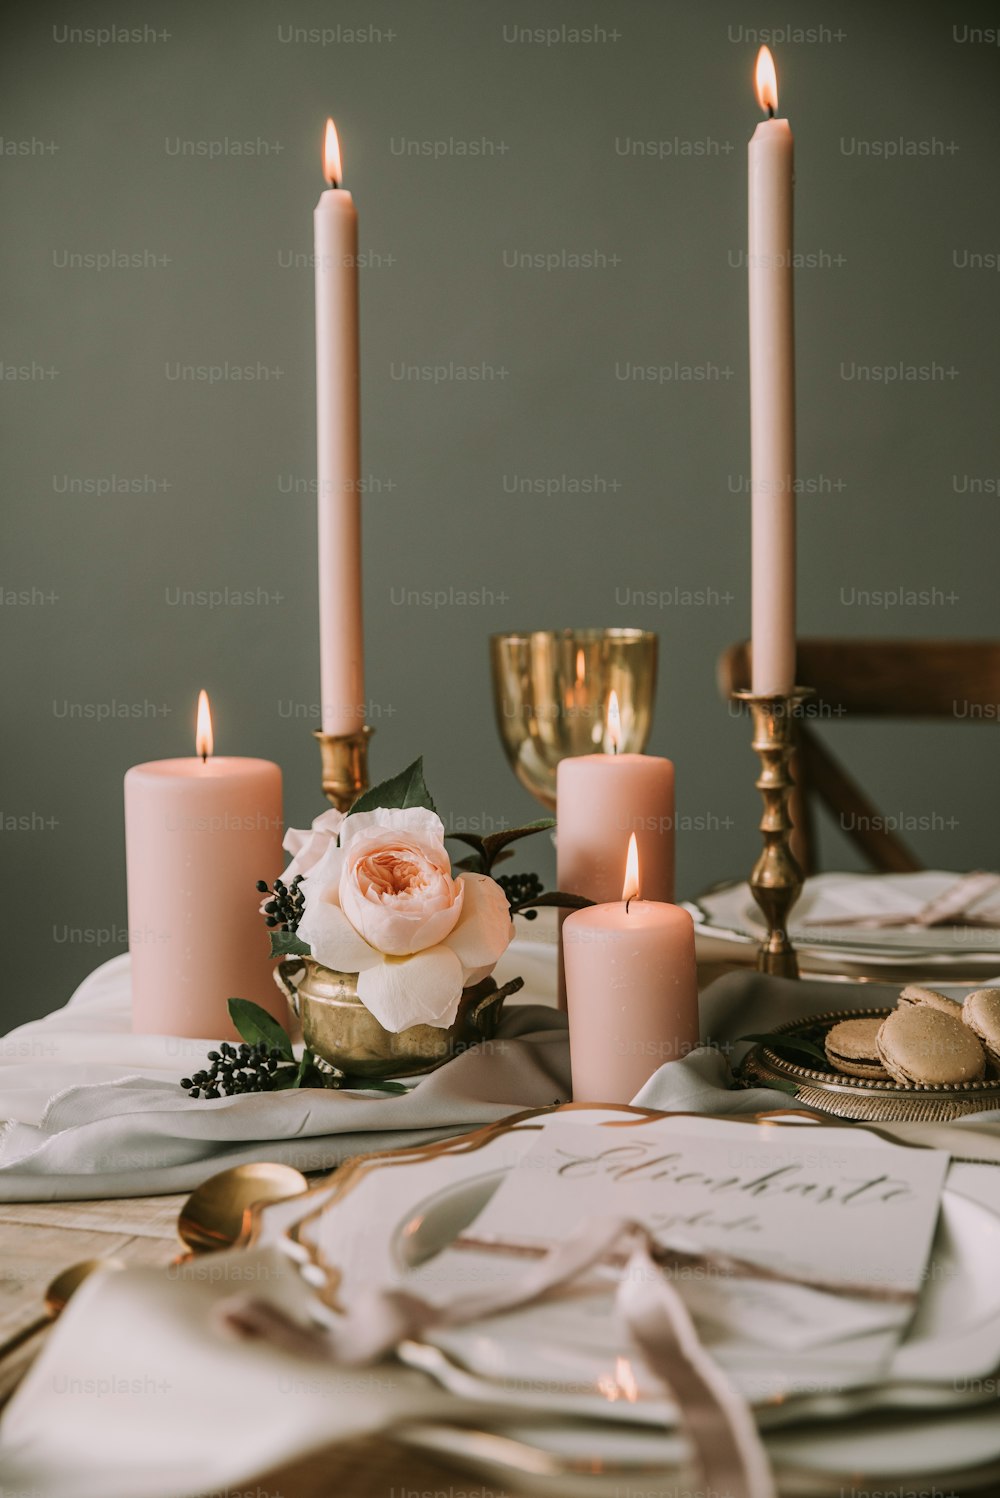 a table topped with candles and plates covered in napkins